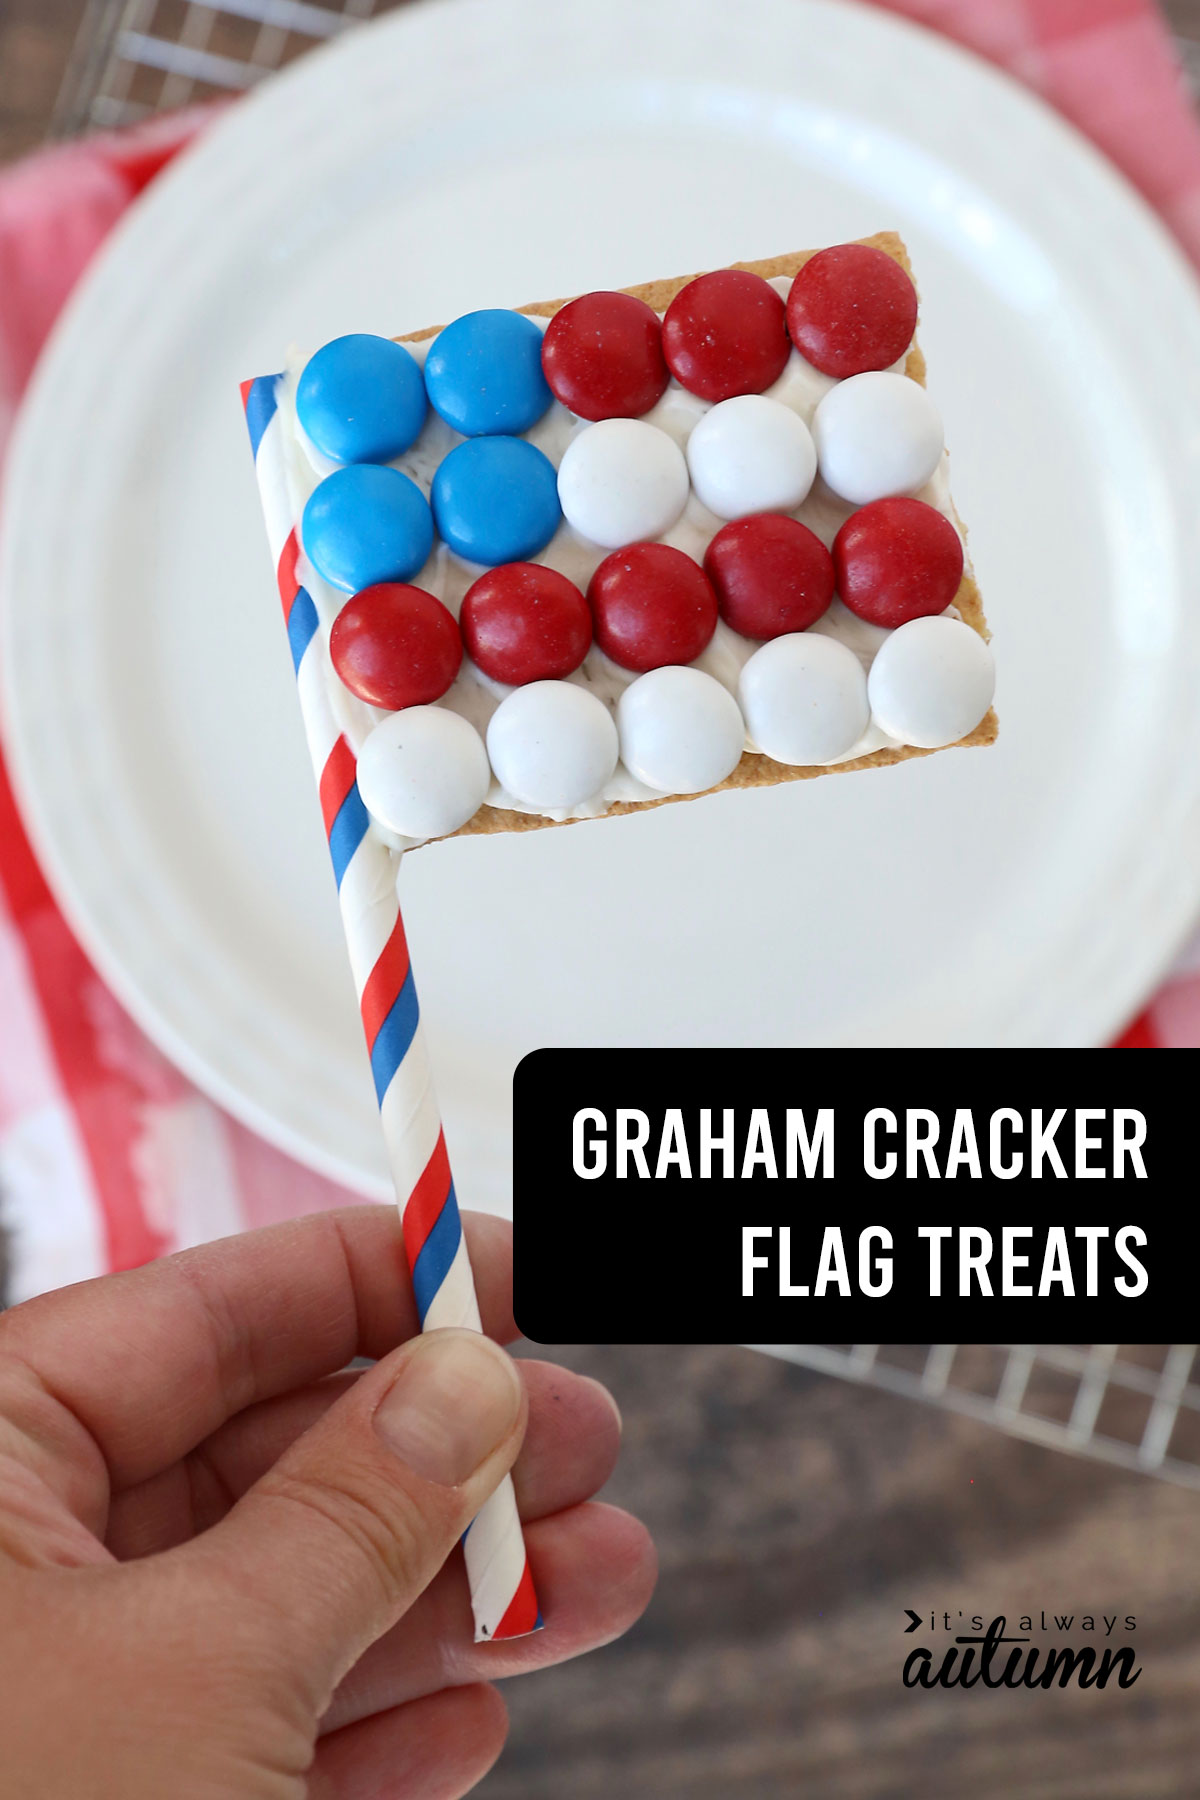 Graham cracker flags are an easy 4th of July treat that kids can make!